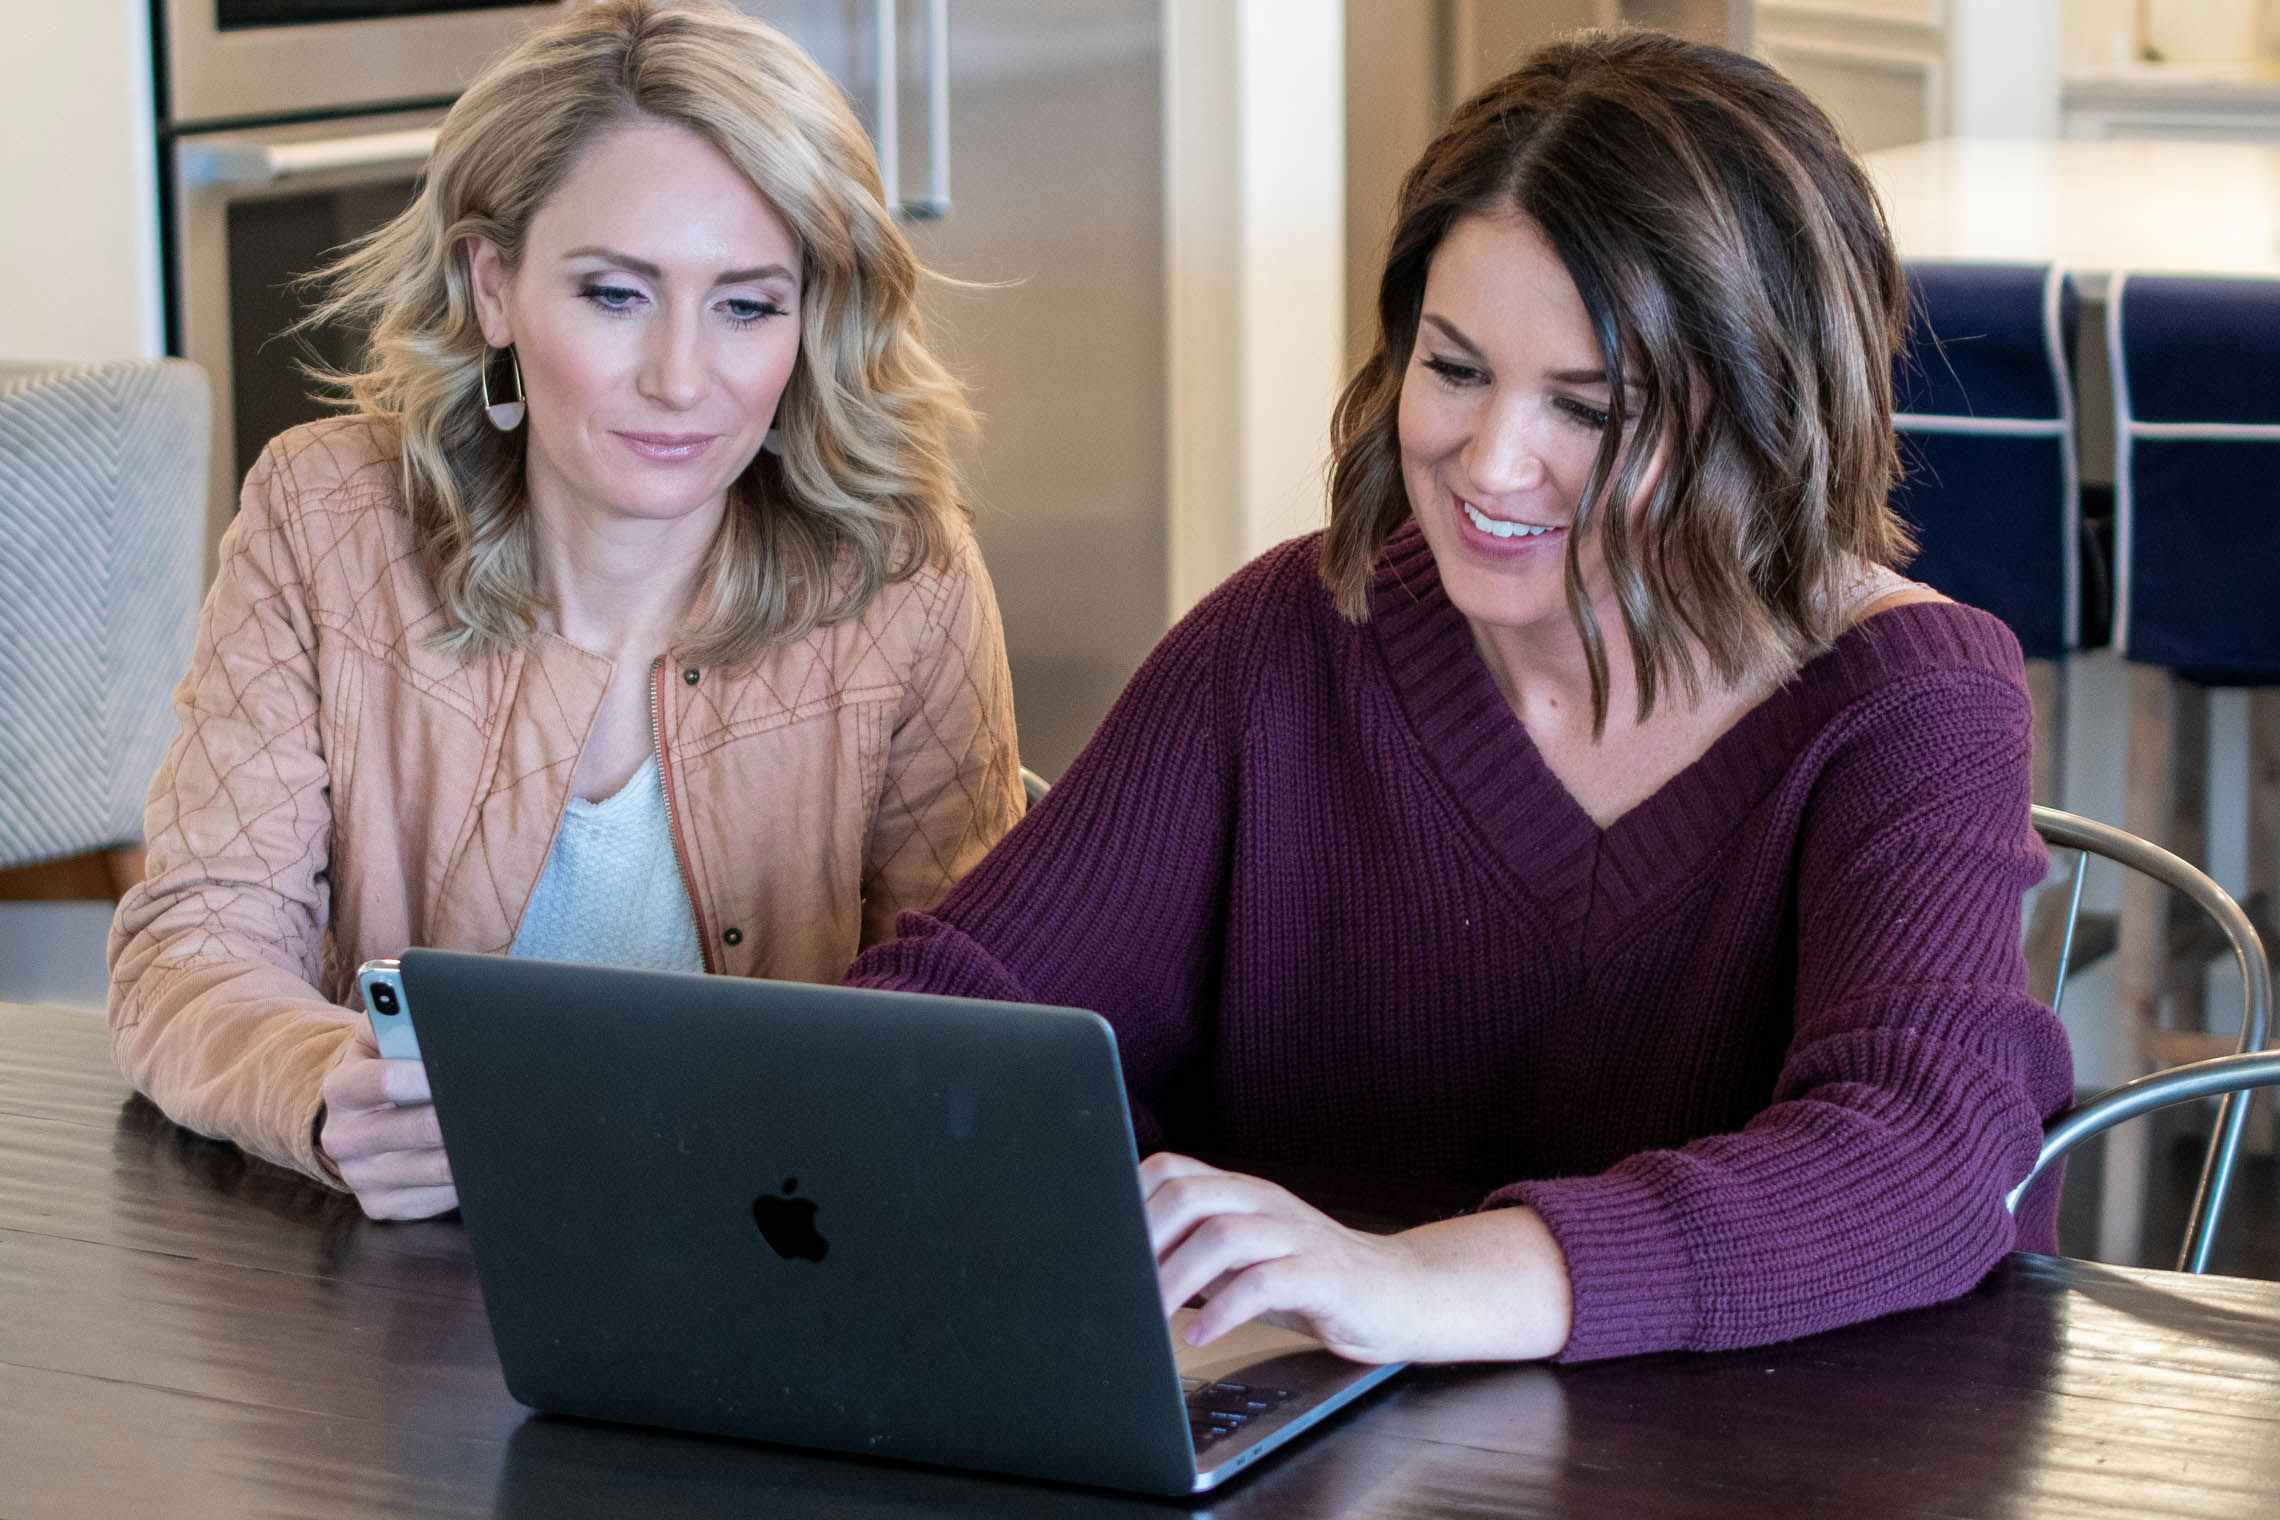 Two women sitting at a table looking at something on a laptop.